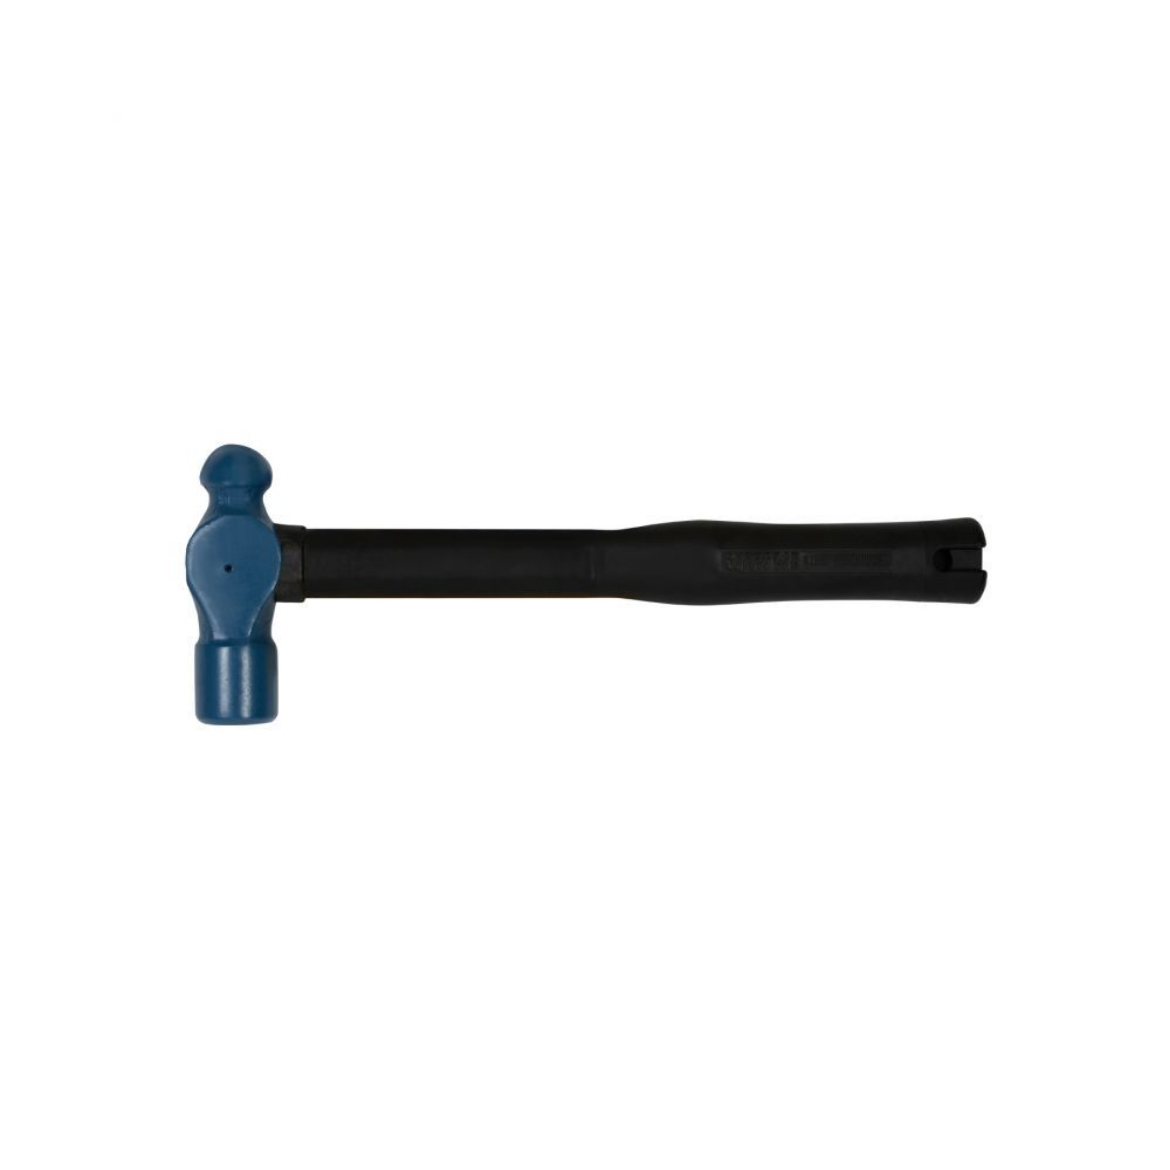 Picture of Ball Pein Hammer 3lb/1.36kg Normalised (soft face), Fibreglass Handle 400mm